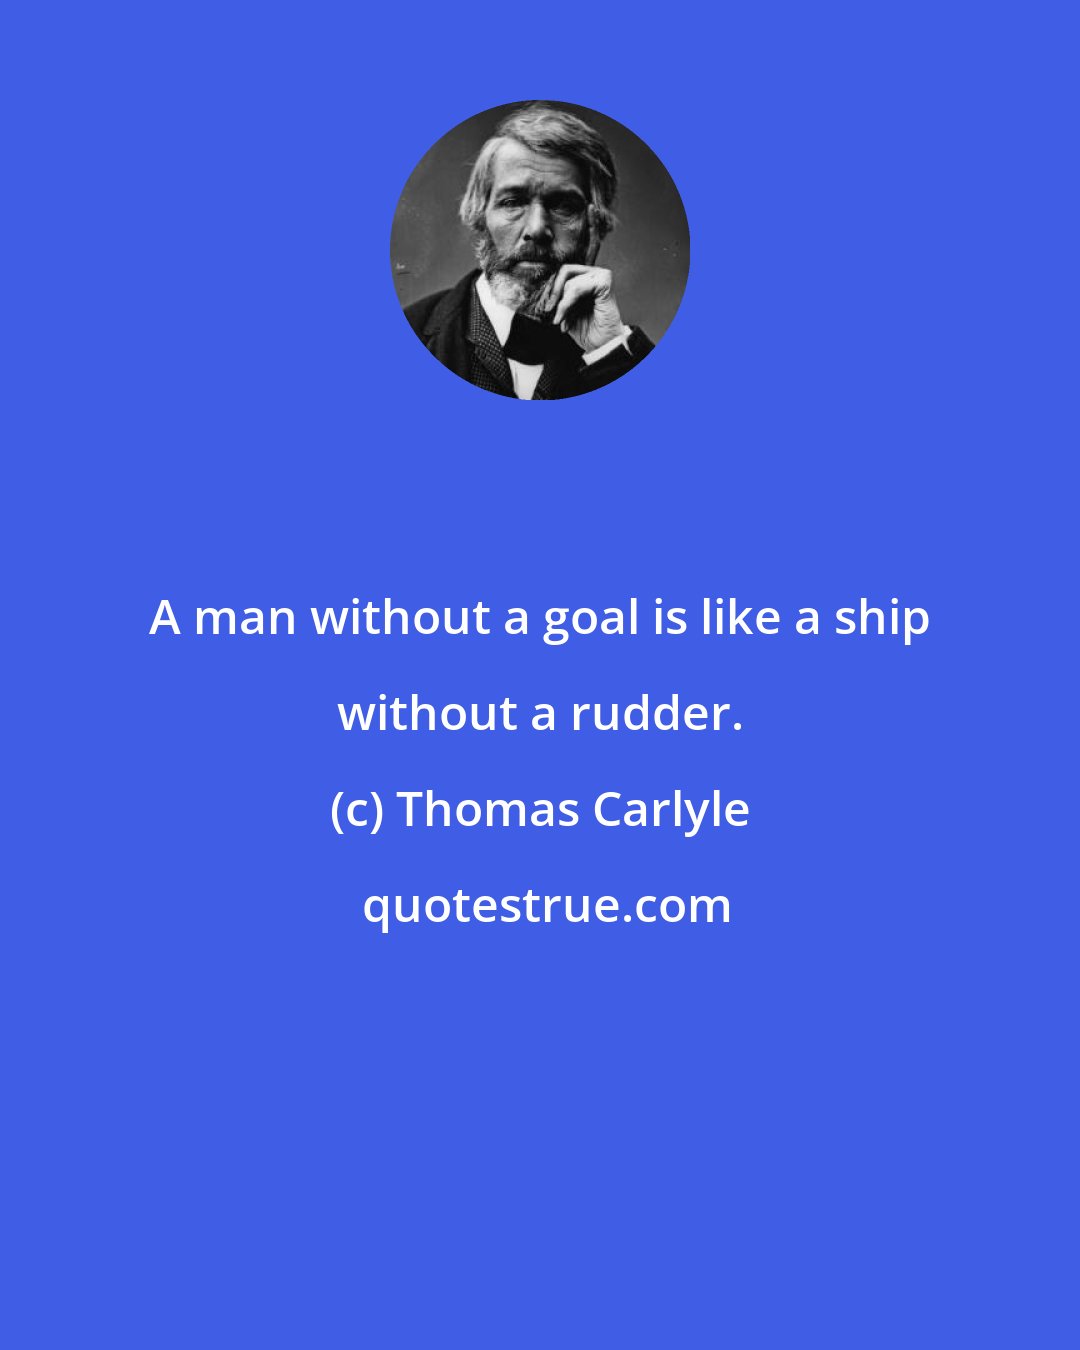 Thomas Carlyle: A man without a goal is like a ship without a rudder.